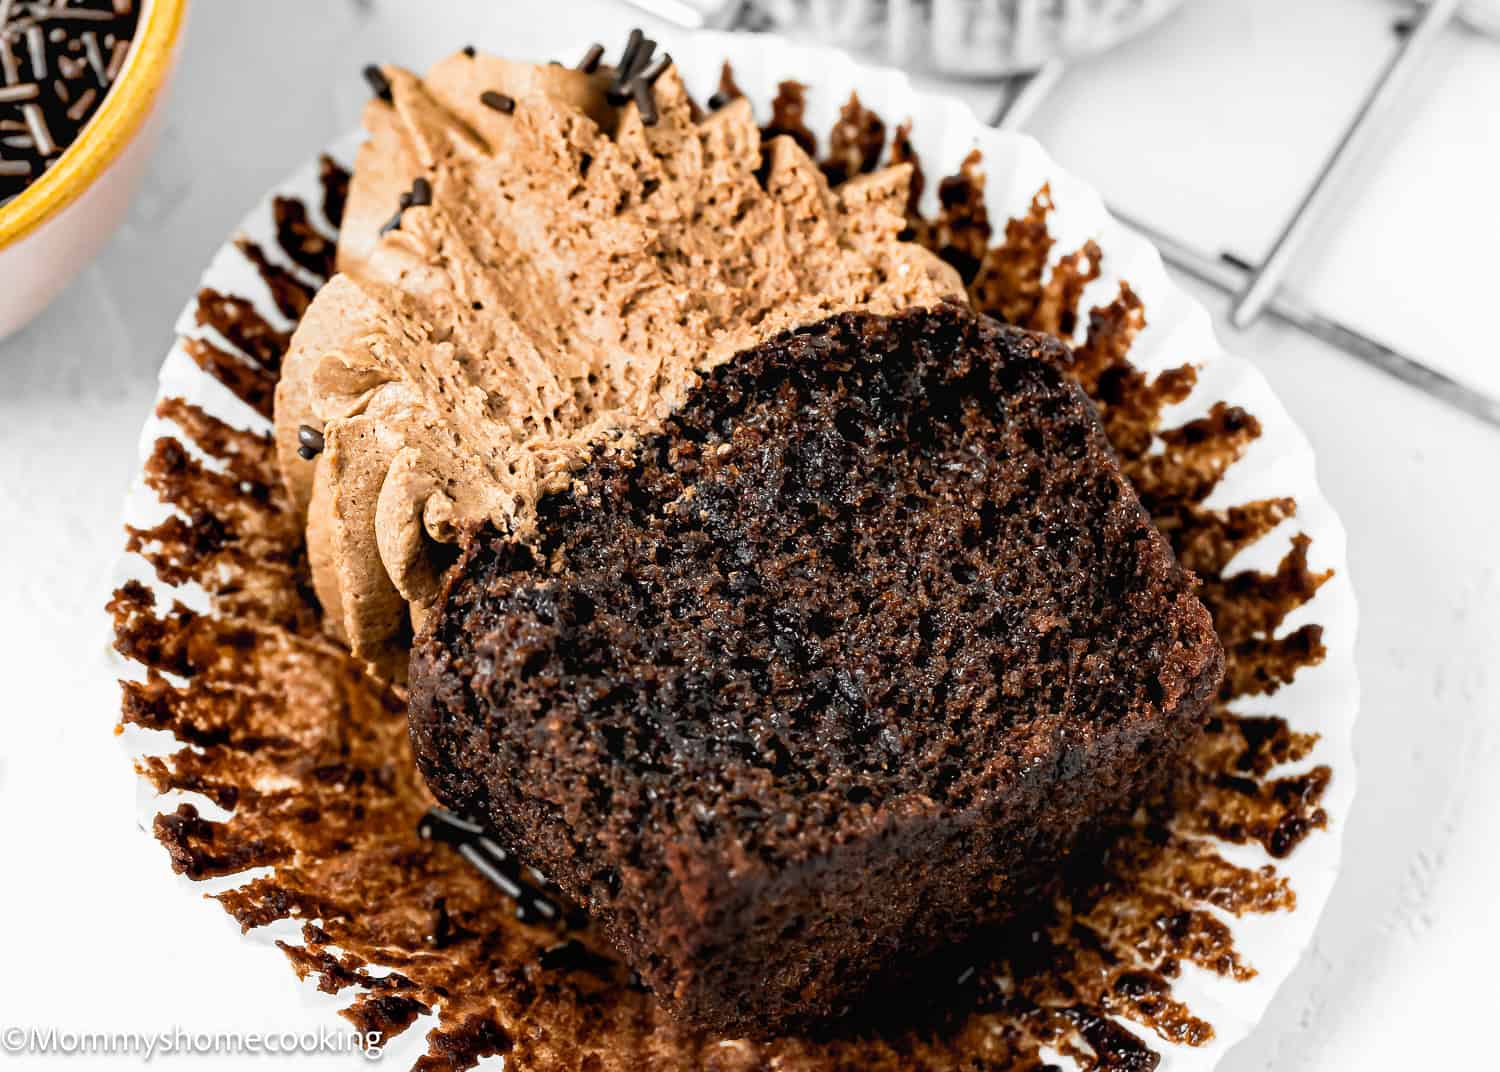 Easy Chocolate Cupcake cut in haft showing its fluffy inside texture.